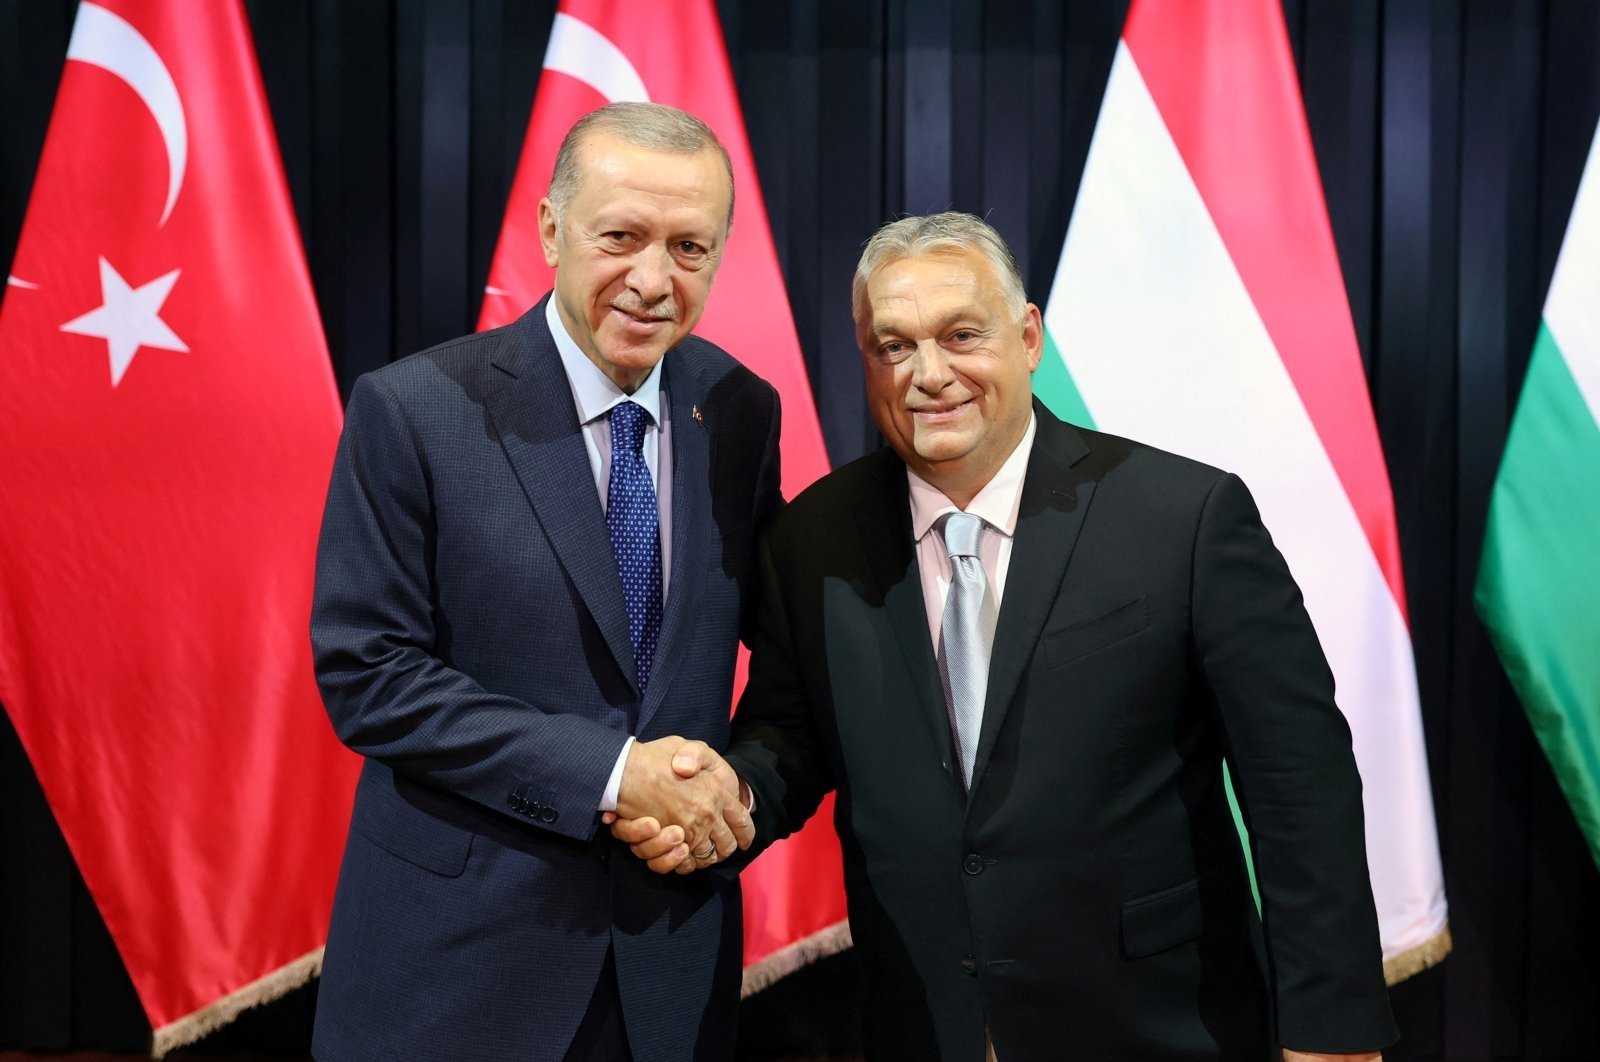 Erdoğan to visit Hungary for road map on trade, cultural co-op | Daily ...